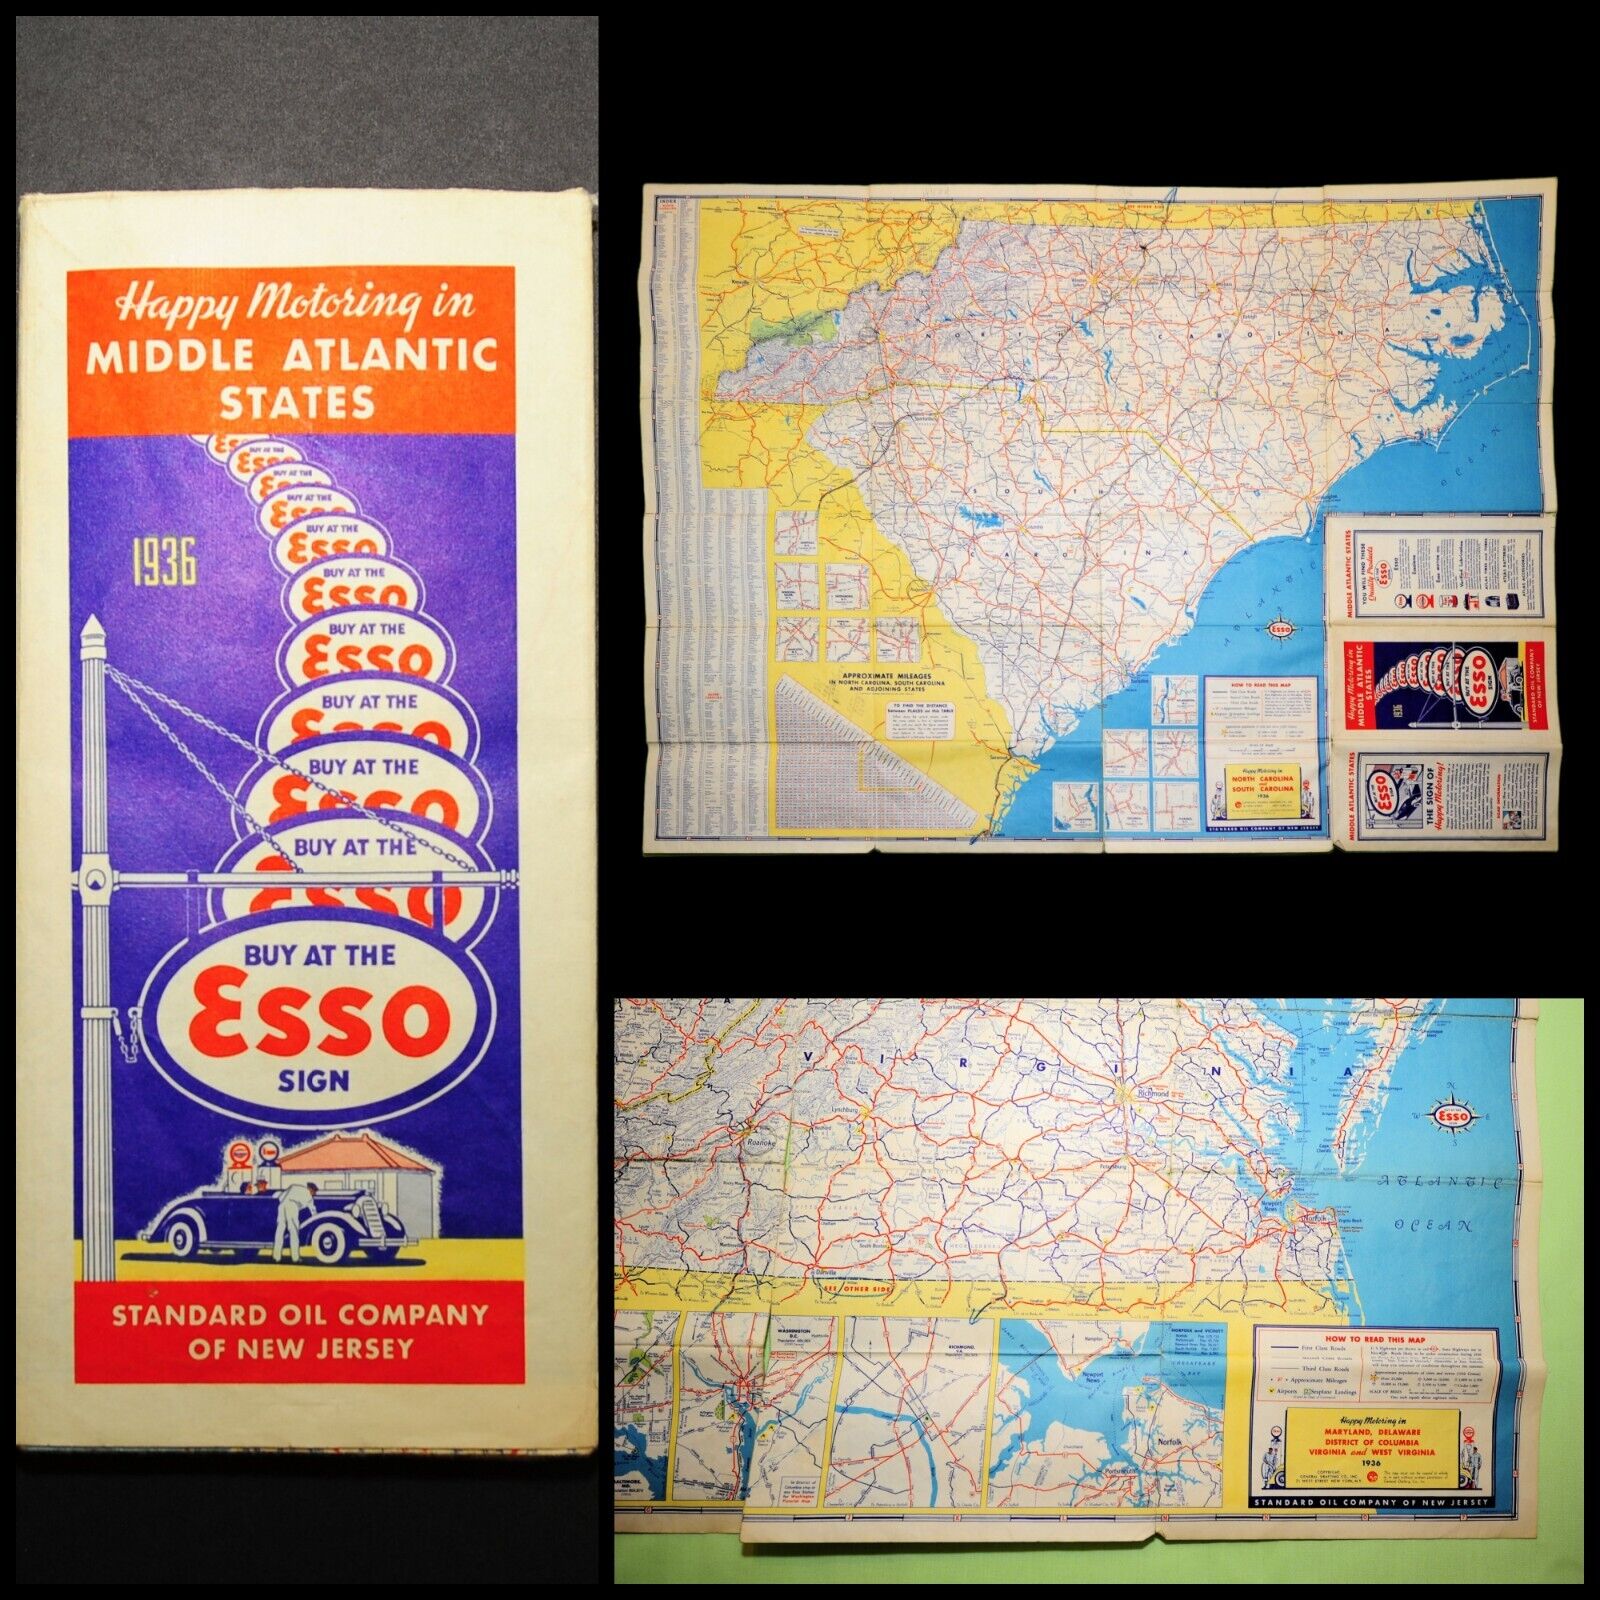 VTG 1936 Esso/Standard Oil Middle ATLANTIC STATES Road Travel Map Wall Decor